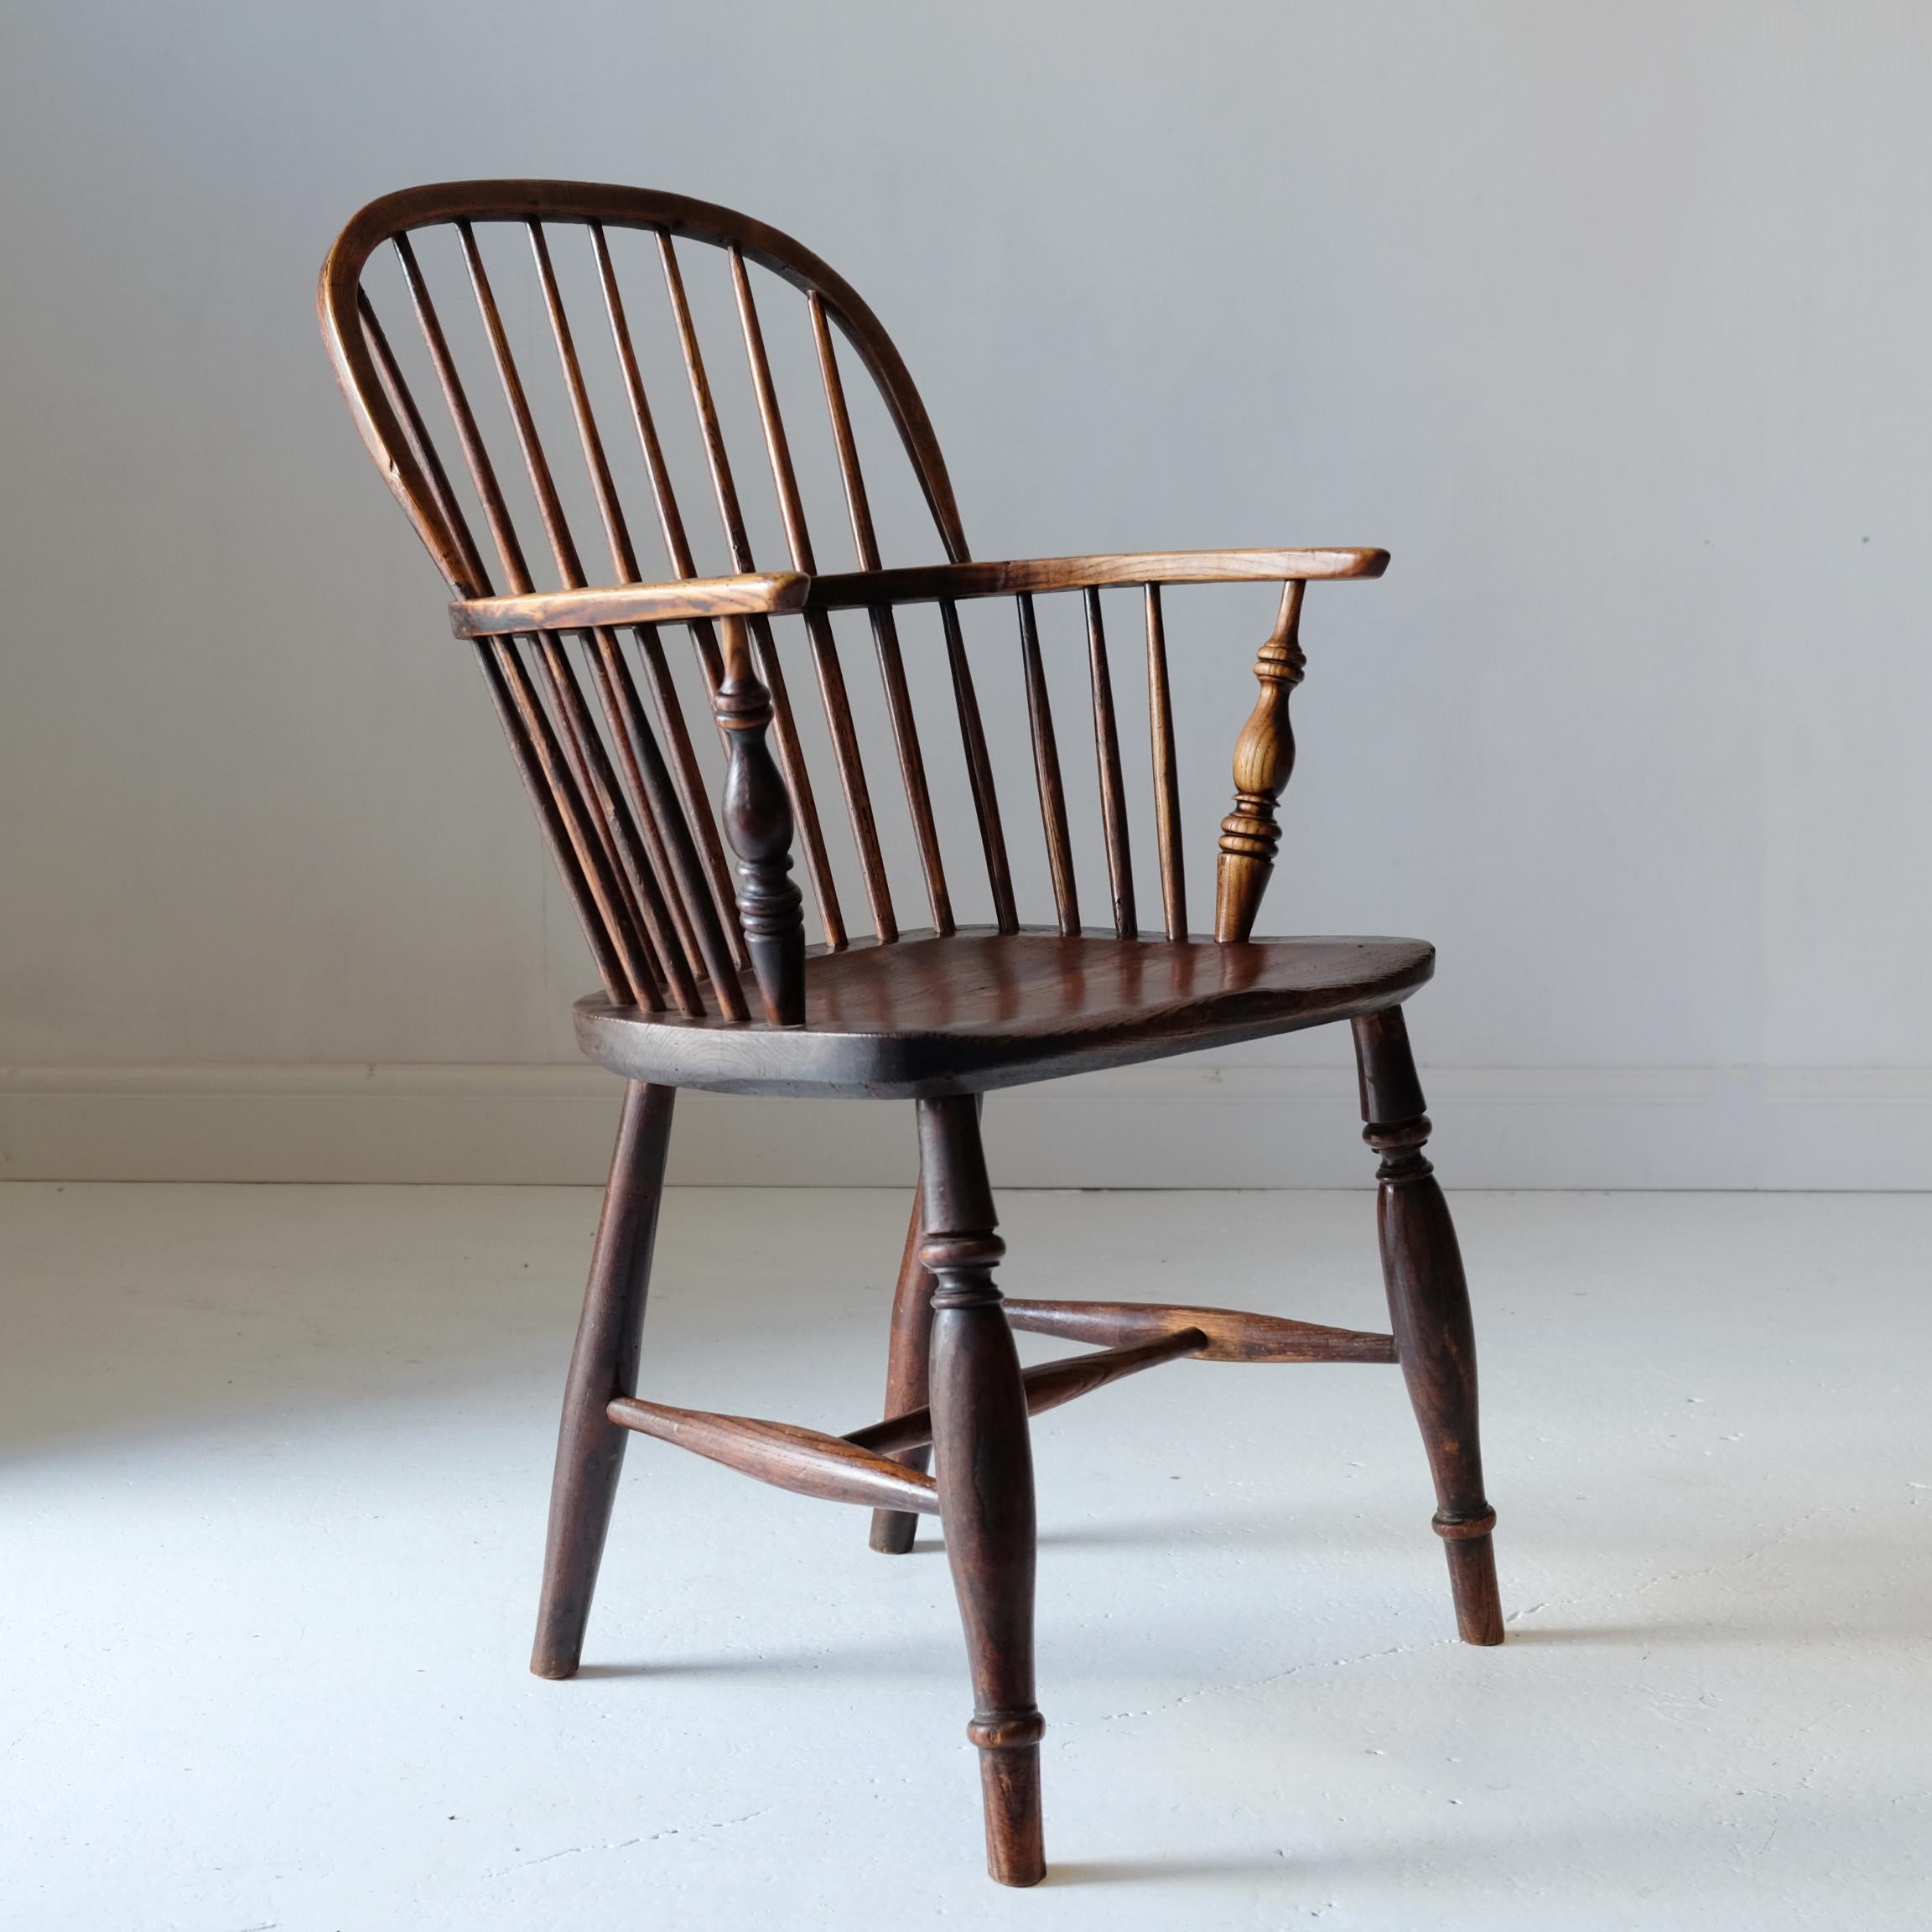 Simple antique low back Windsor chair in ash and elm. Turned legs, united by H stretcher, solid elm seat with nice grain pattern, turned arm supports and stick spindles above and below the single steam bent hoop arms, finishing with a steam bent